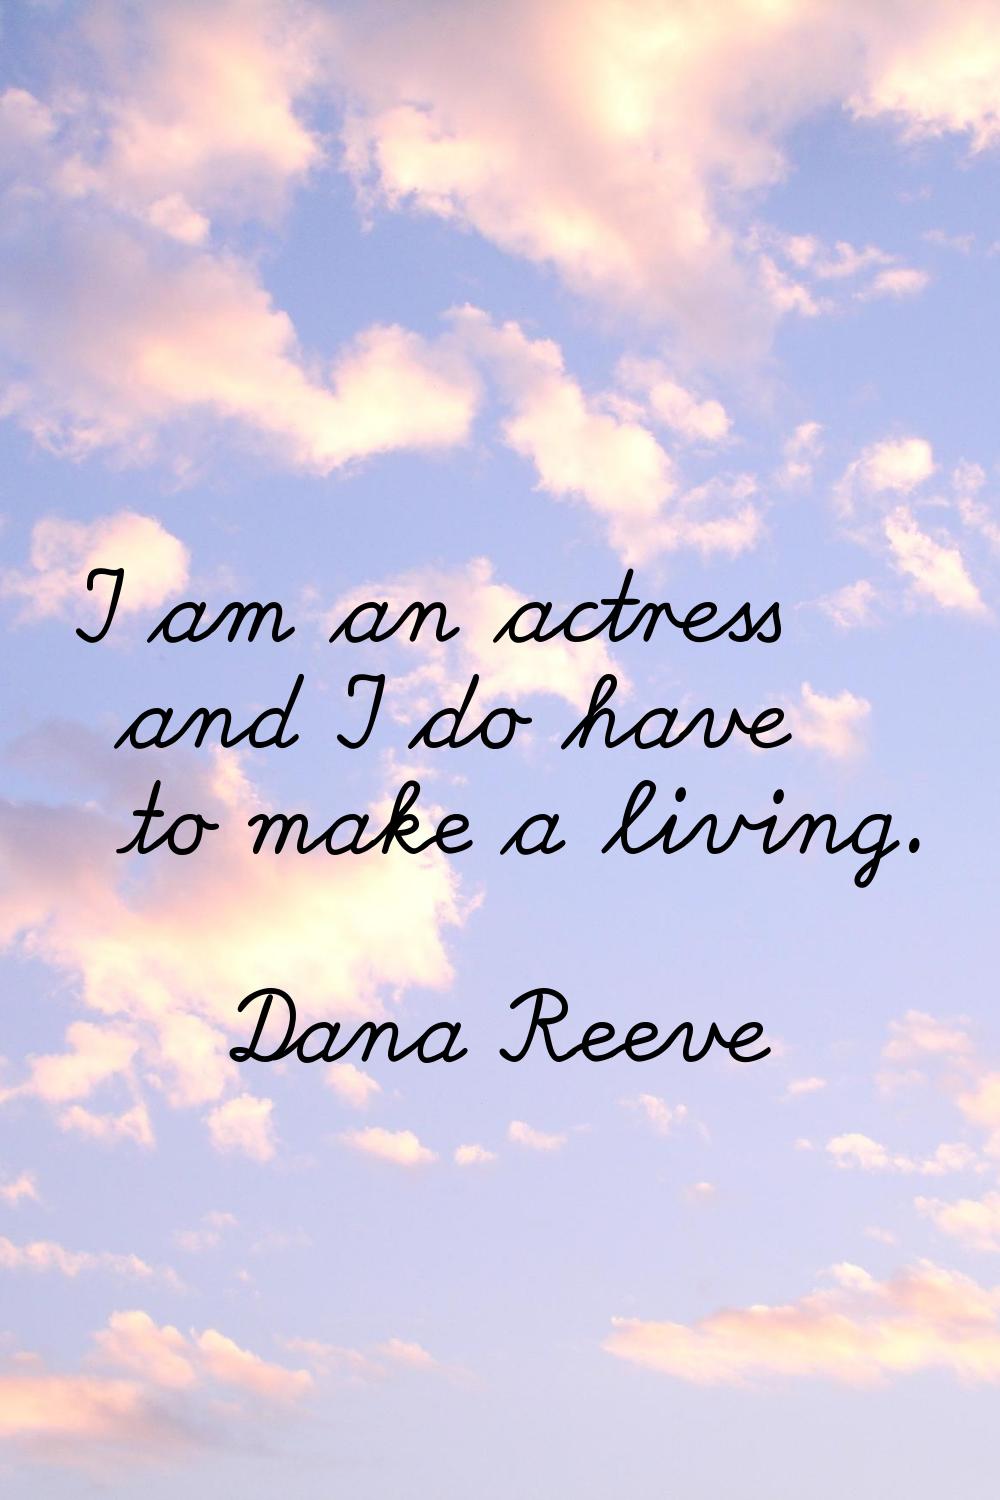 I am an actress and I do have to make a living.